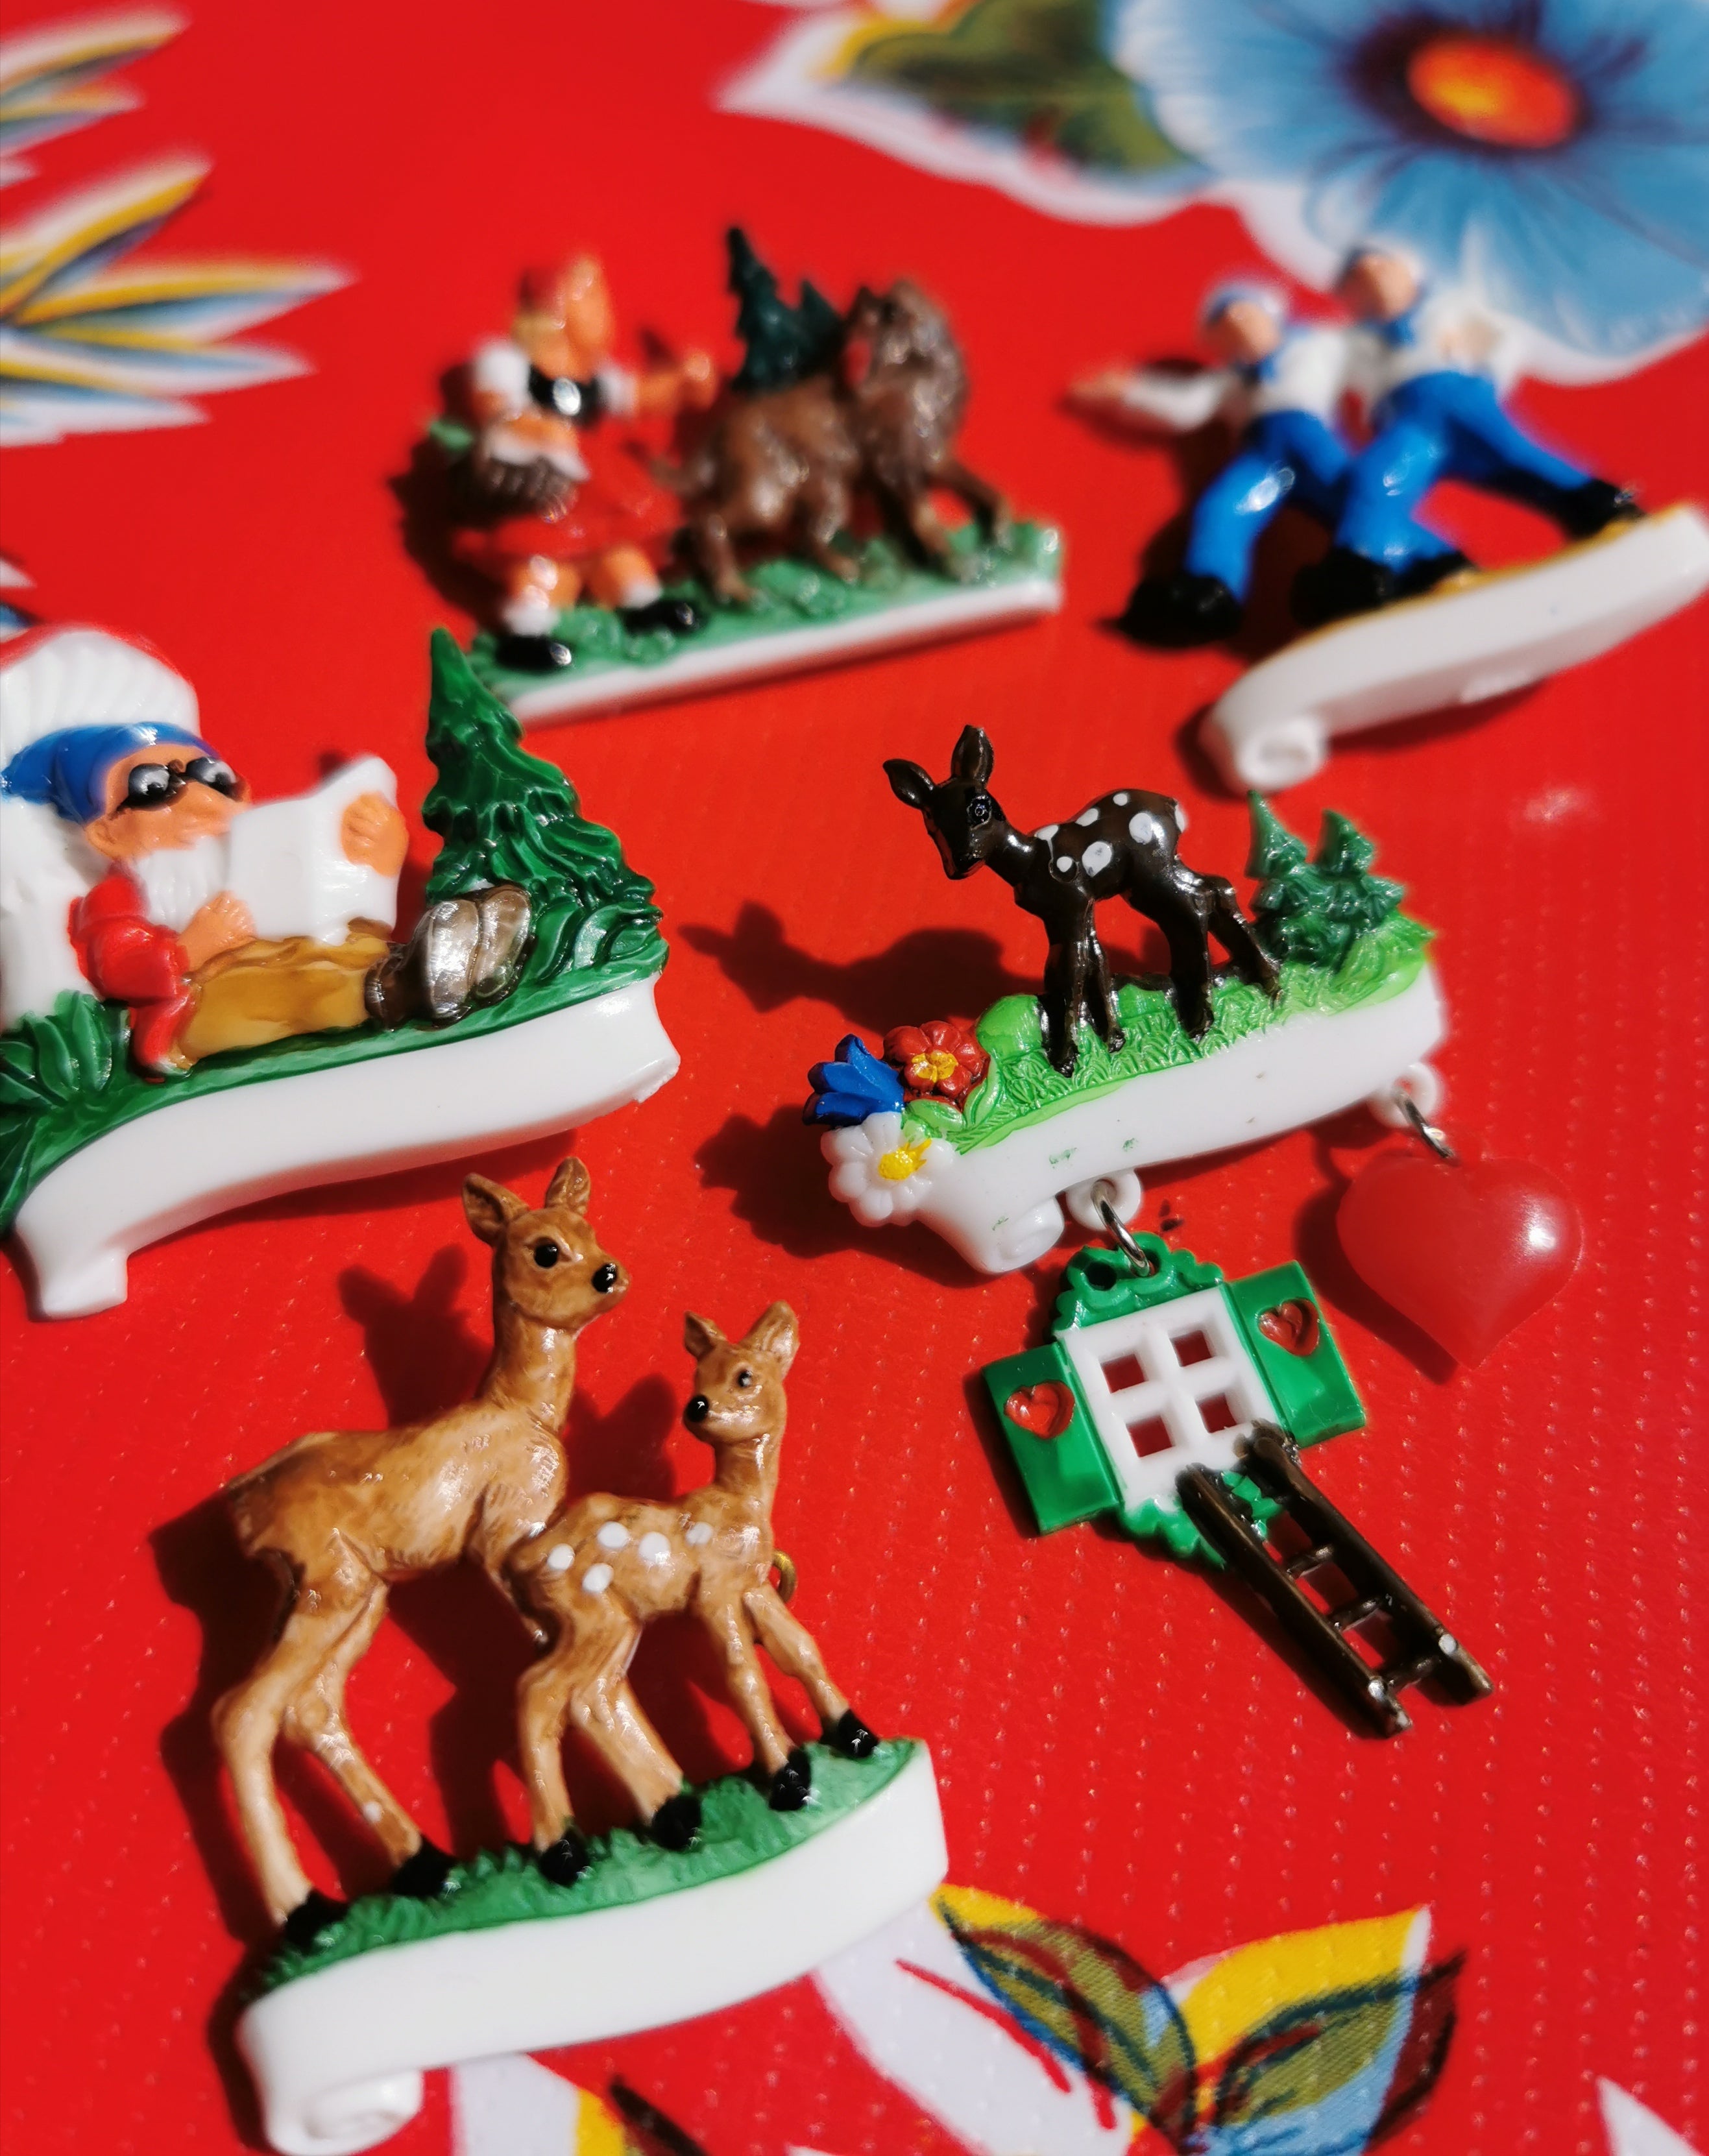 Fairytale folksy brooches, deer, gnomes, wolves and Sailors!!

Sizes vary approx 3cm x 3cm

Handpainted resin. 

